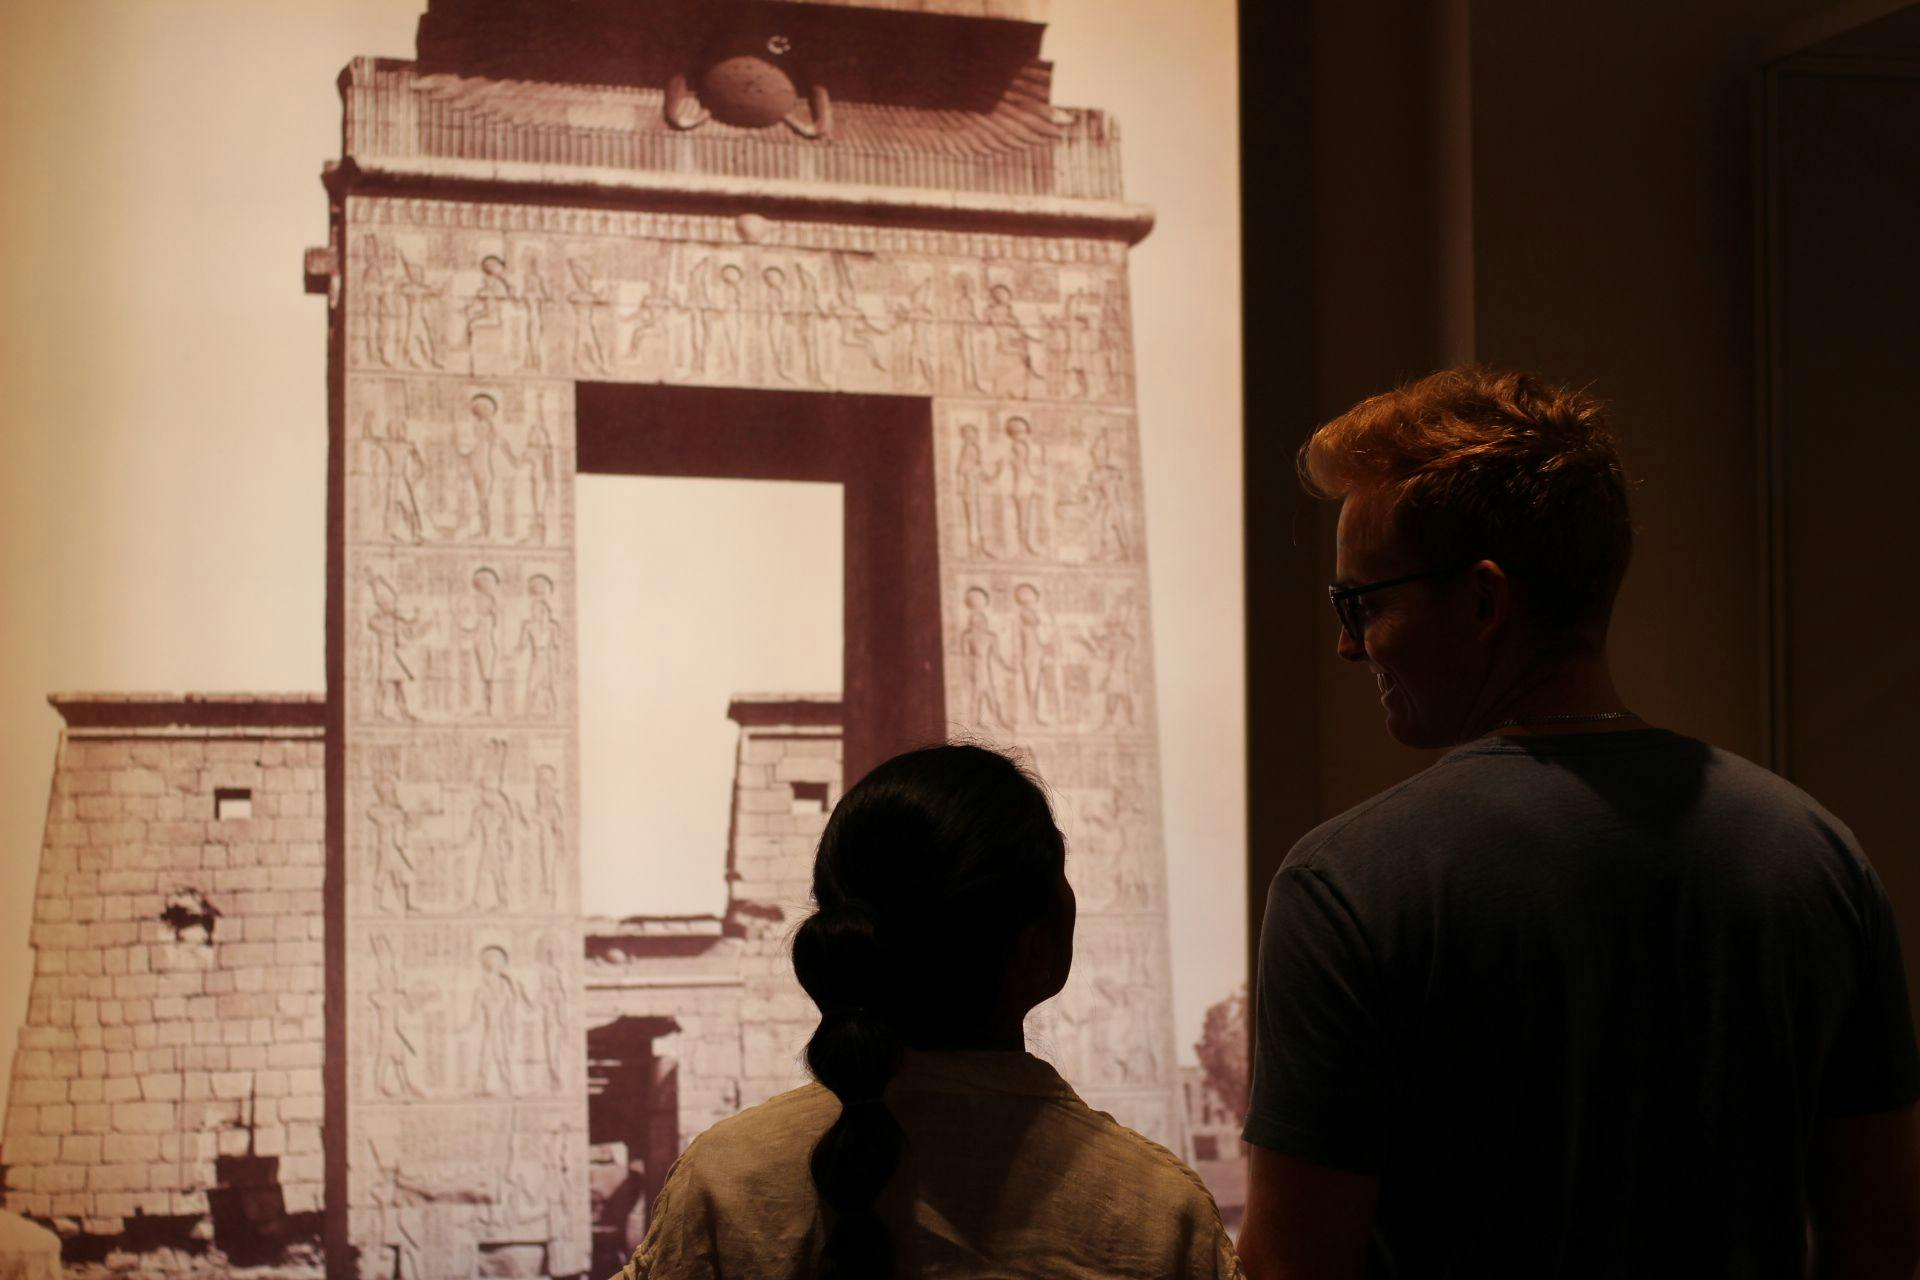 Two people look at each other before an illuminated image of an archway in Ancient Egypt.